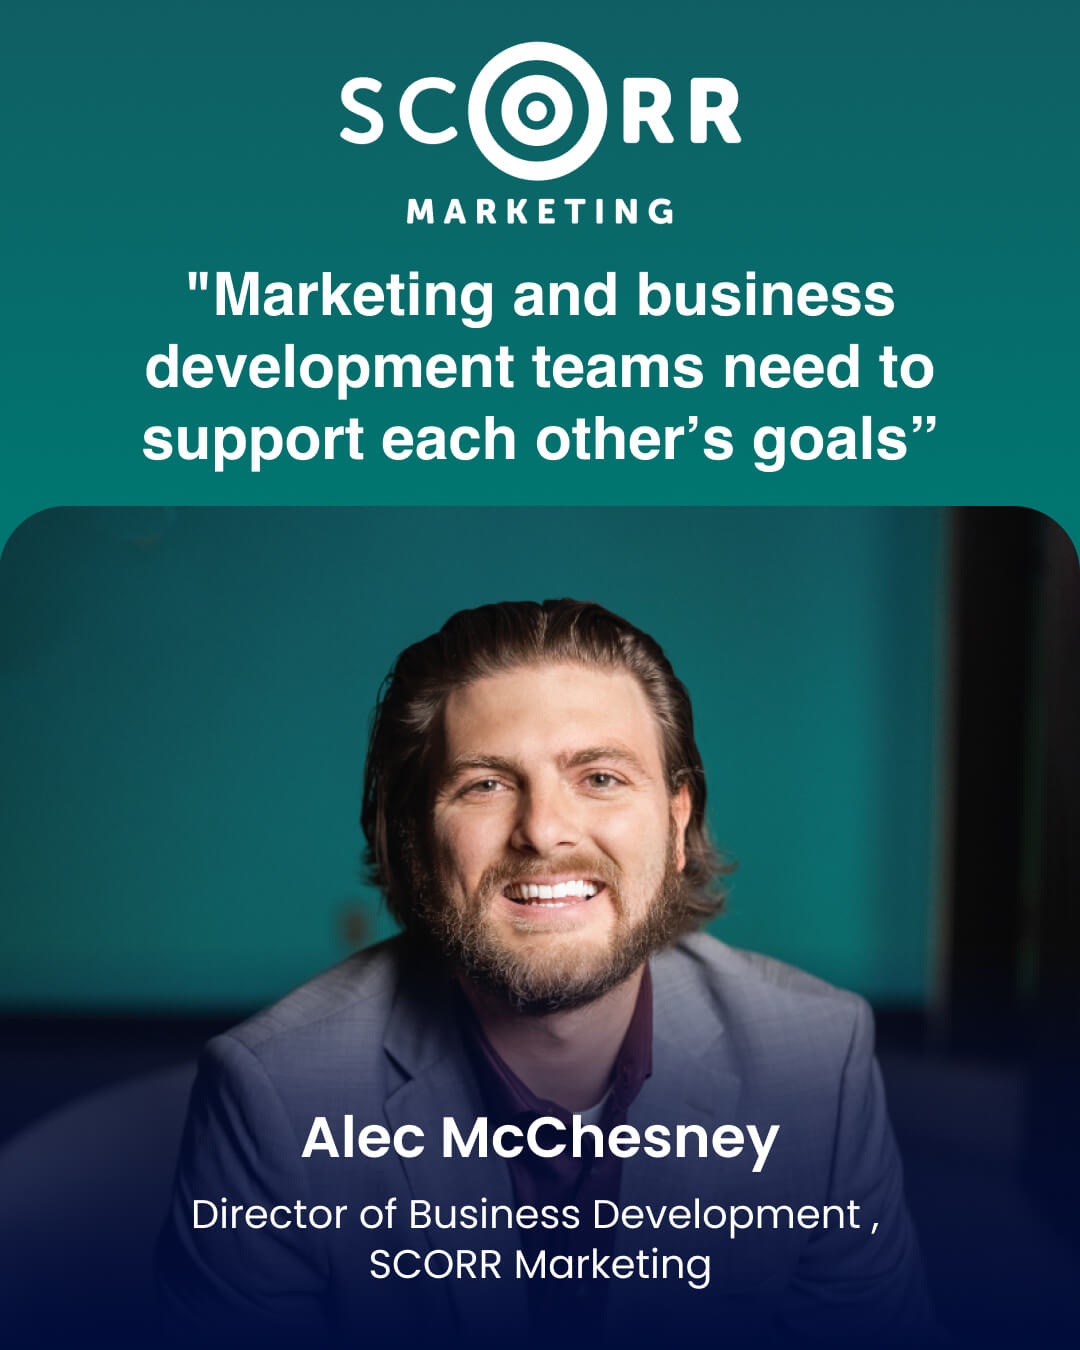 "Marketing and business development teams need to support each other’s goals”